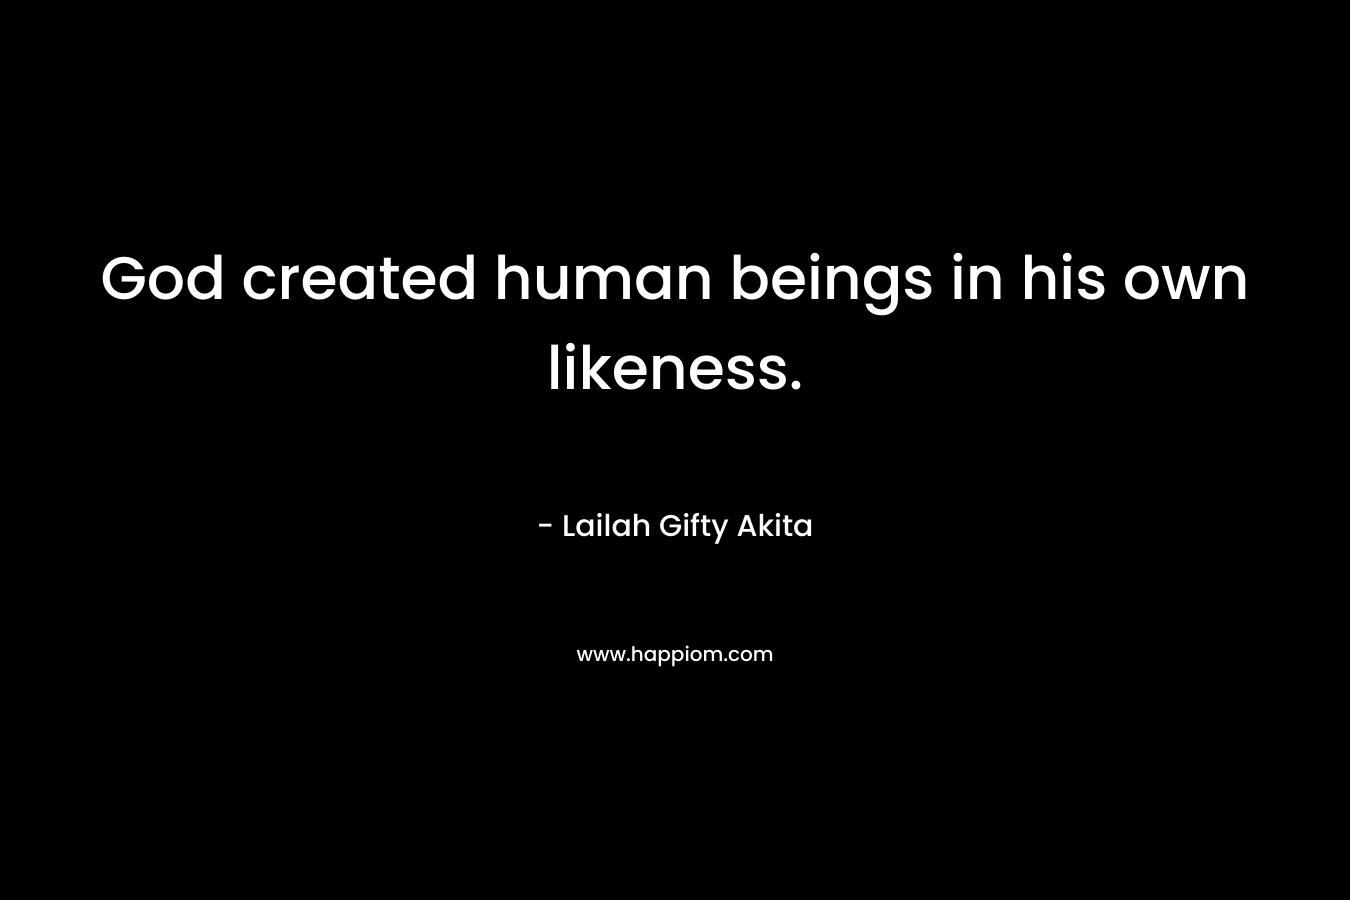 God created human beings in his own likeness. – Lailah Gifty Akita